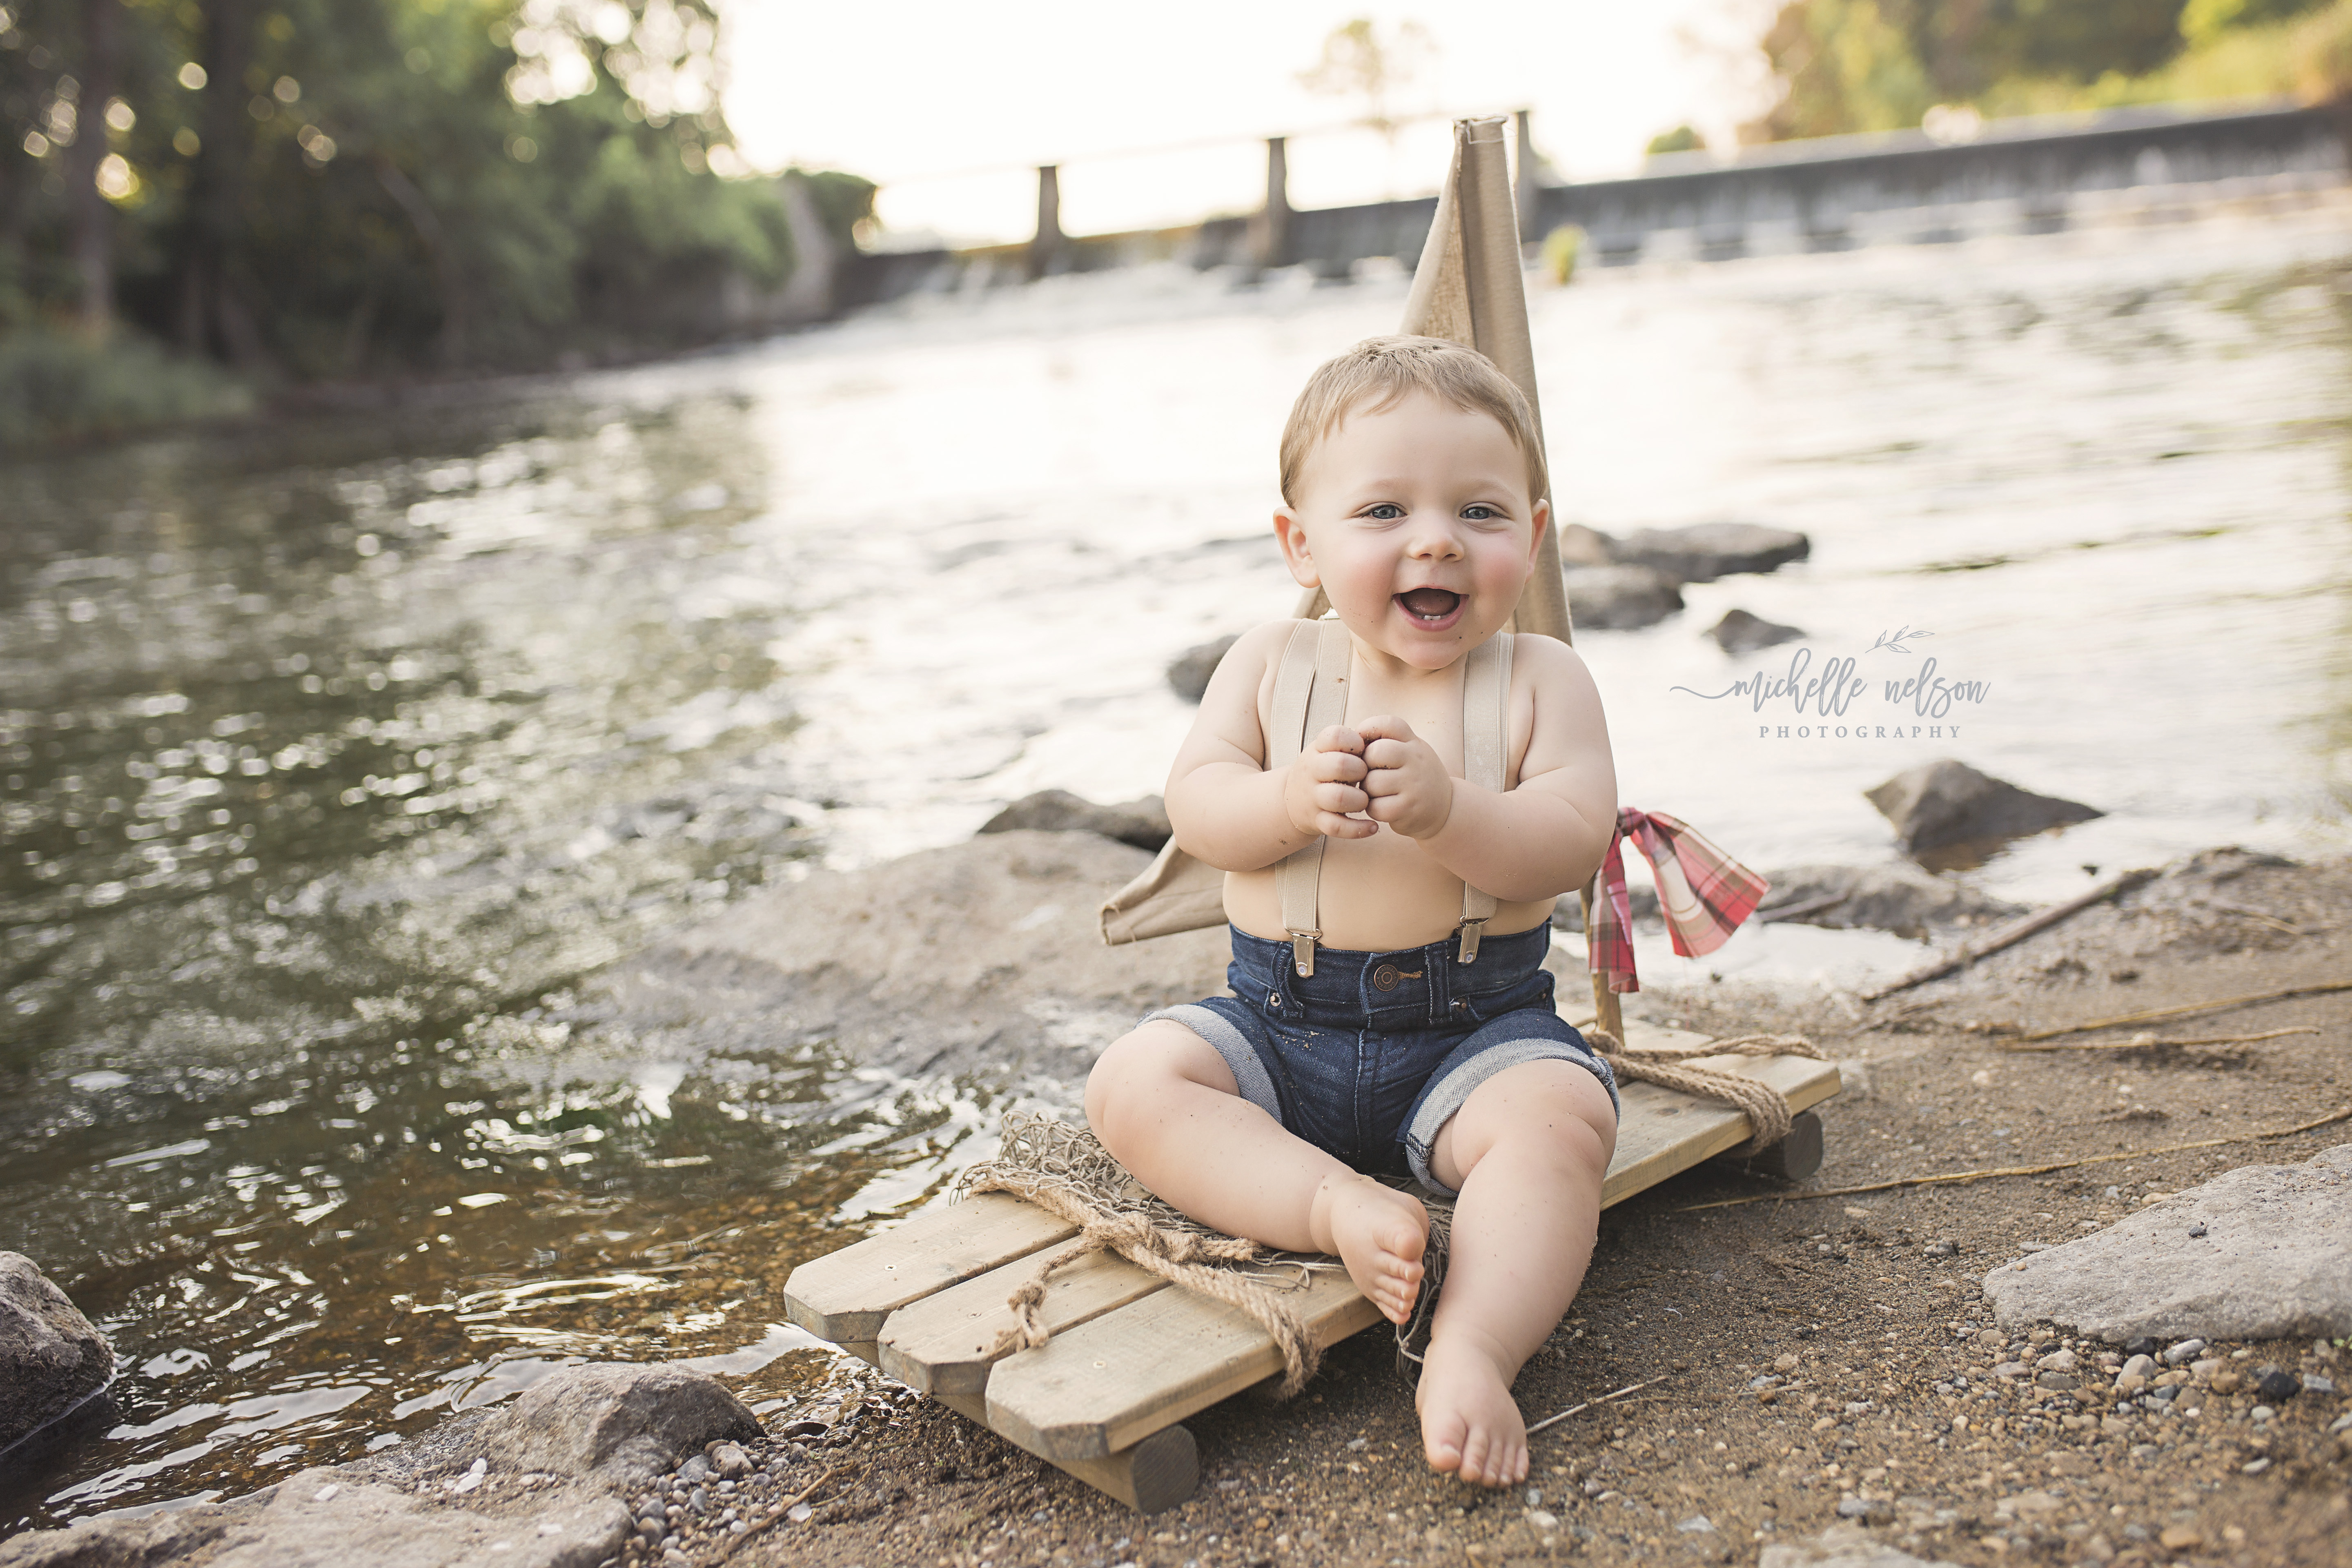 Tanner Turns 1! – Gifting a Photo Session